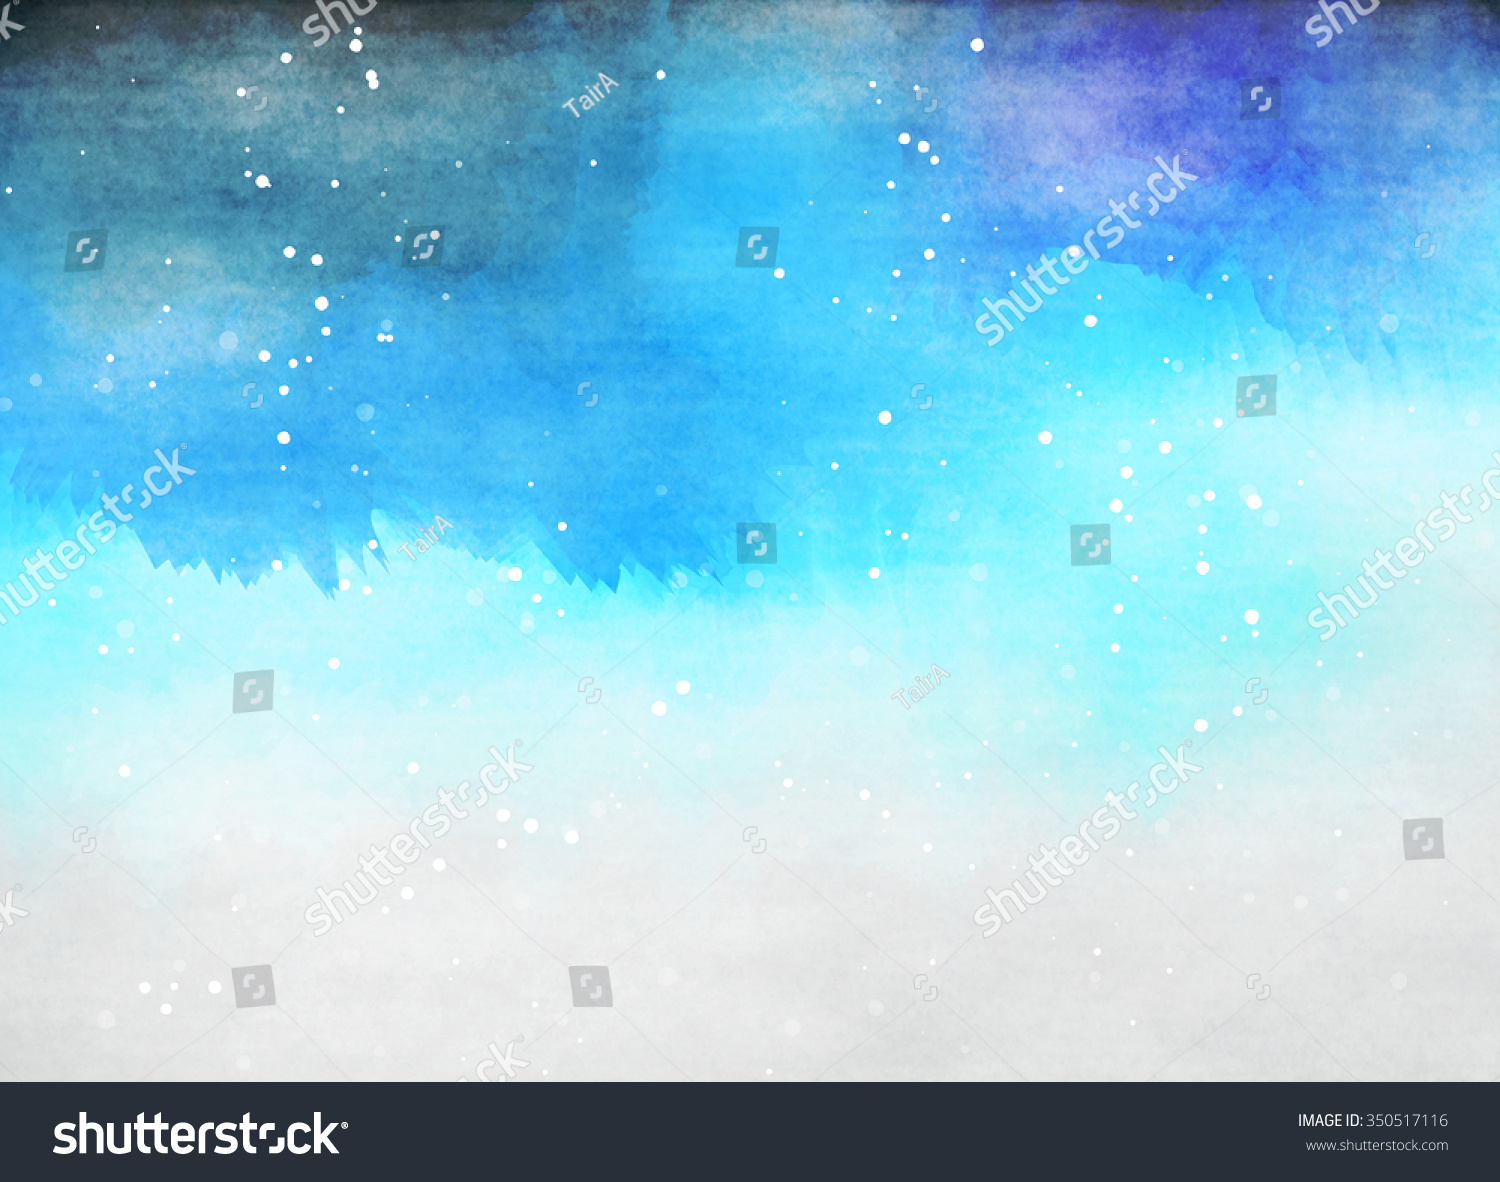 Abstract Colorful Watercolor Background Digital Art Stock Illustration ...